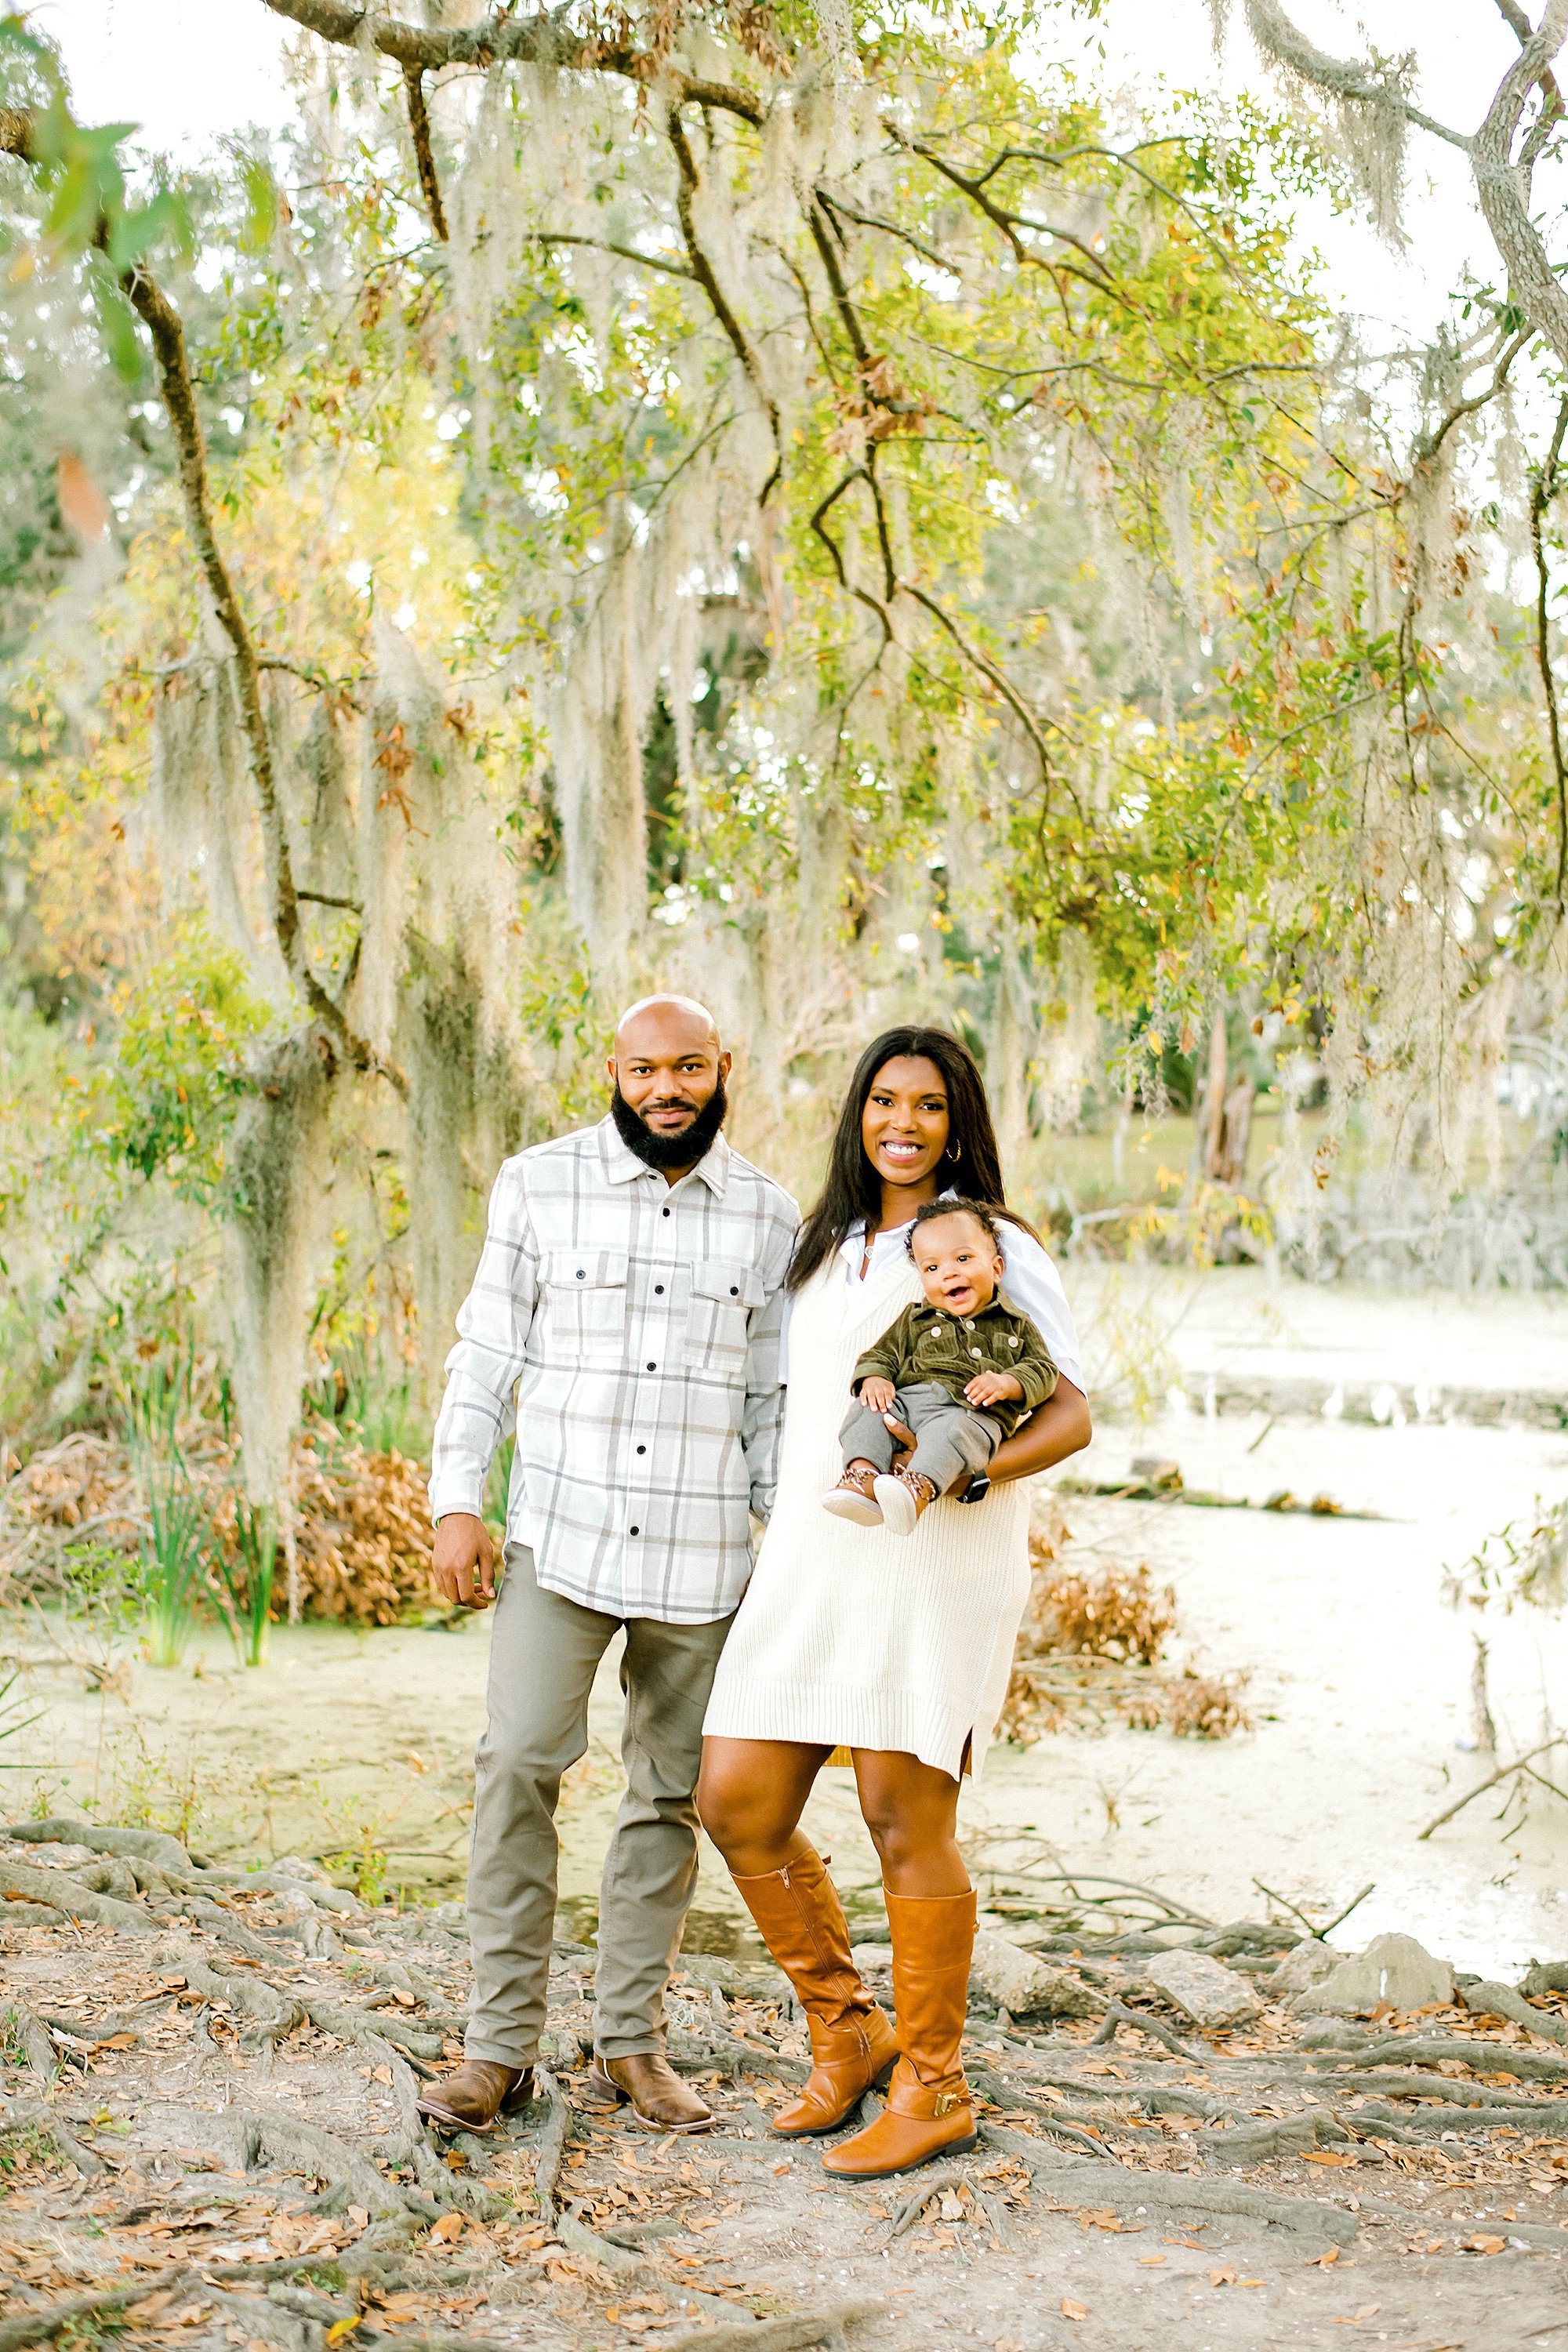 French Quarter Engagement Shoot-New Orleans French Quarter-New Orleans Photographer_0661.jpg